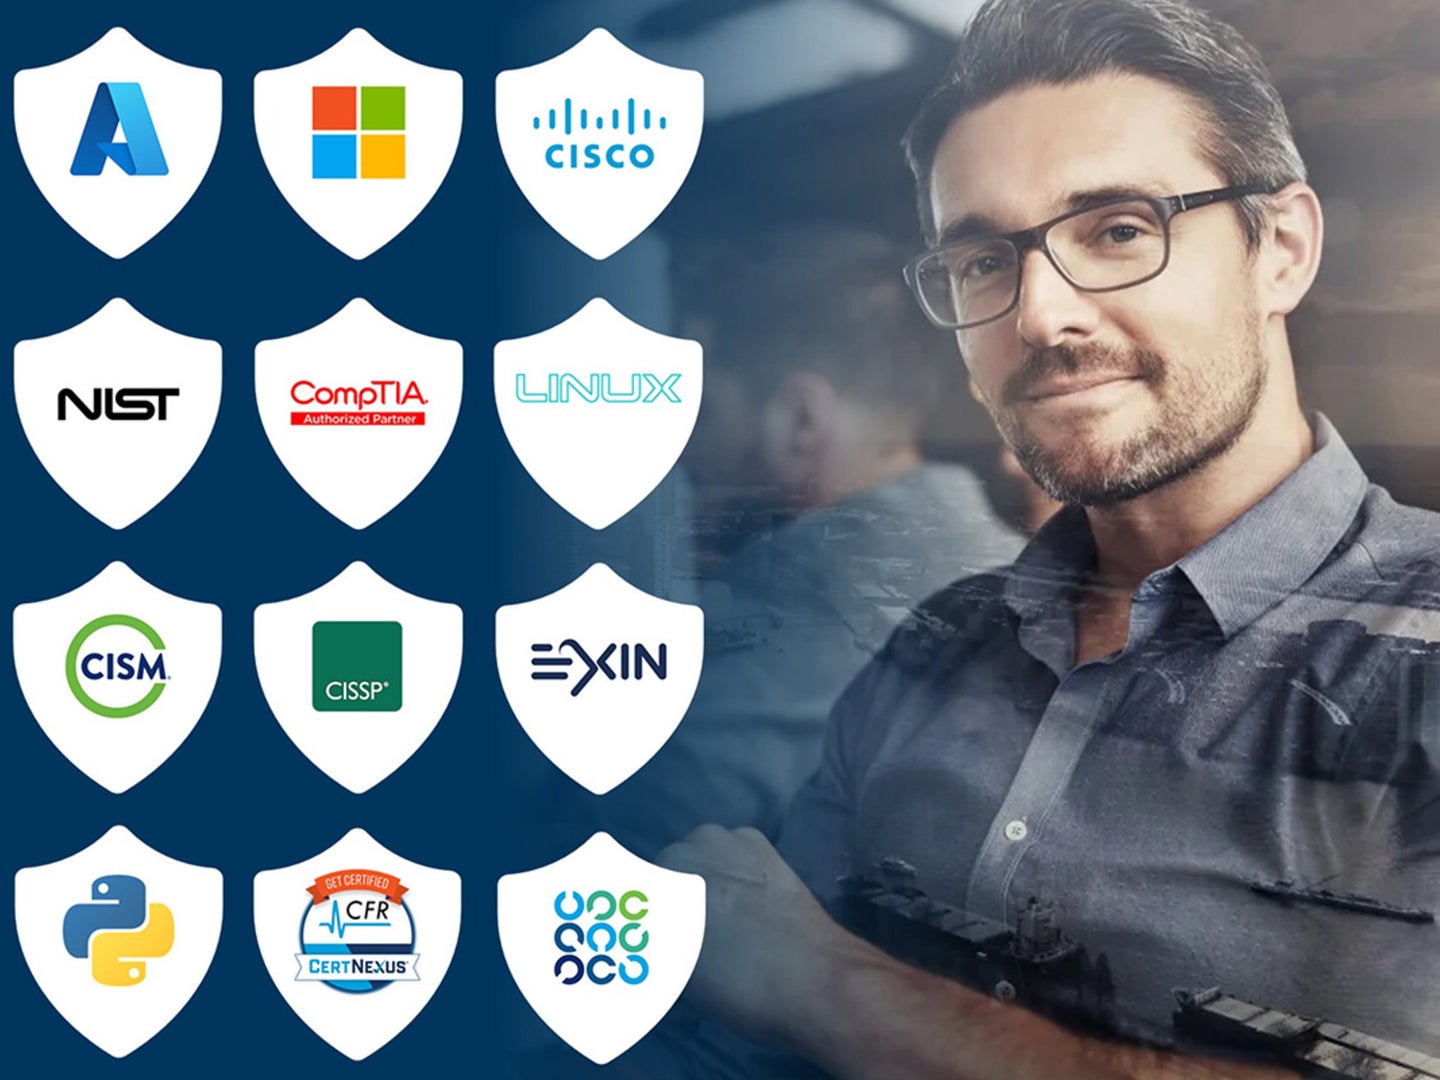 A man poses with logos of different cyber security companies